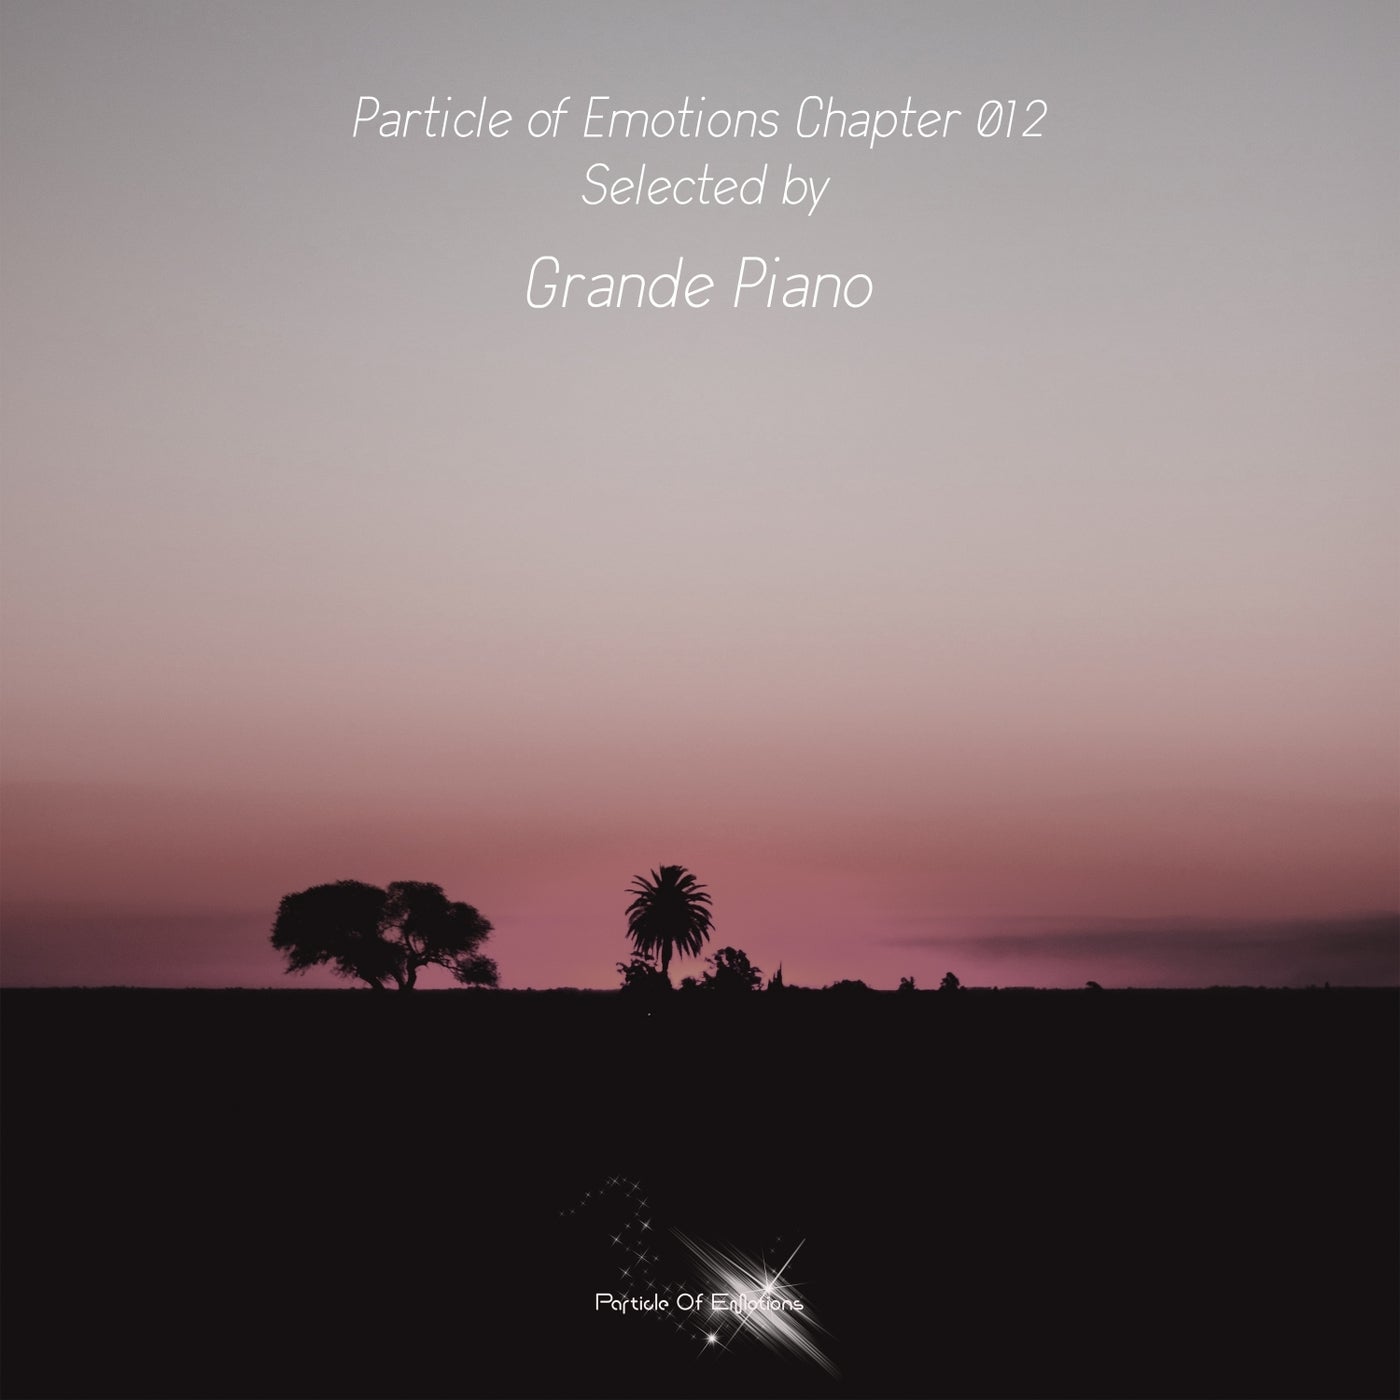 Particle of Emotions Chapter 012